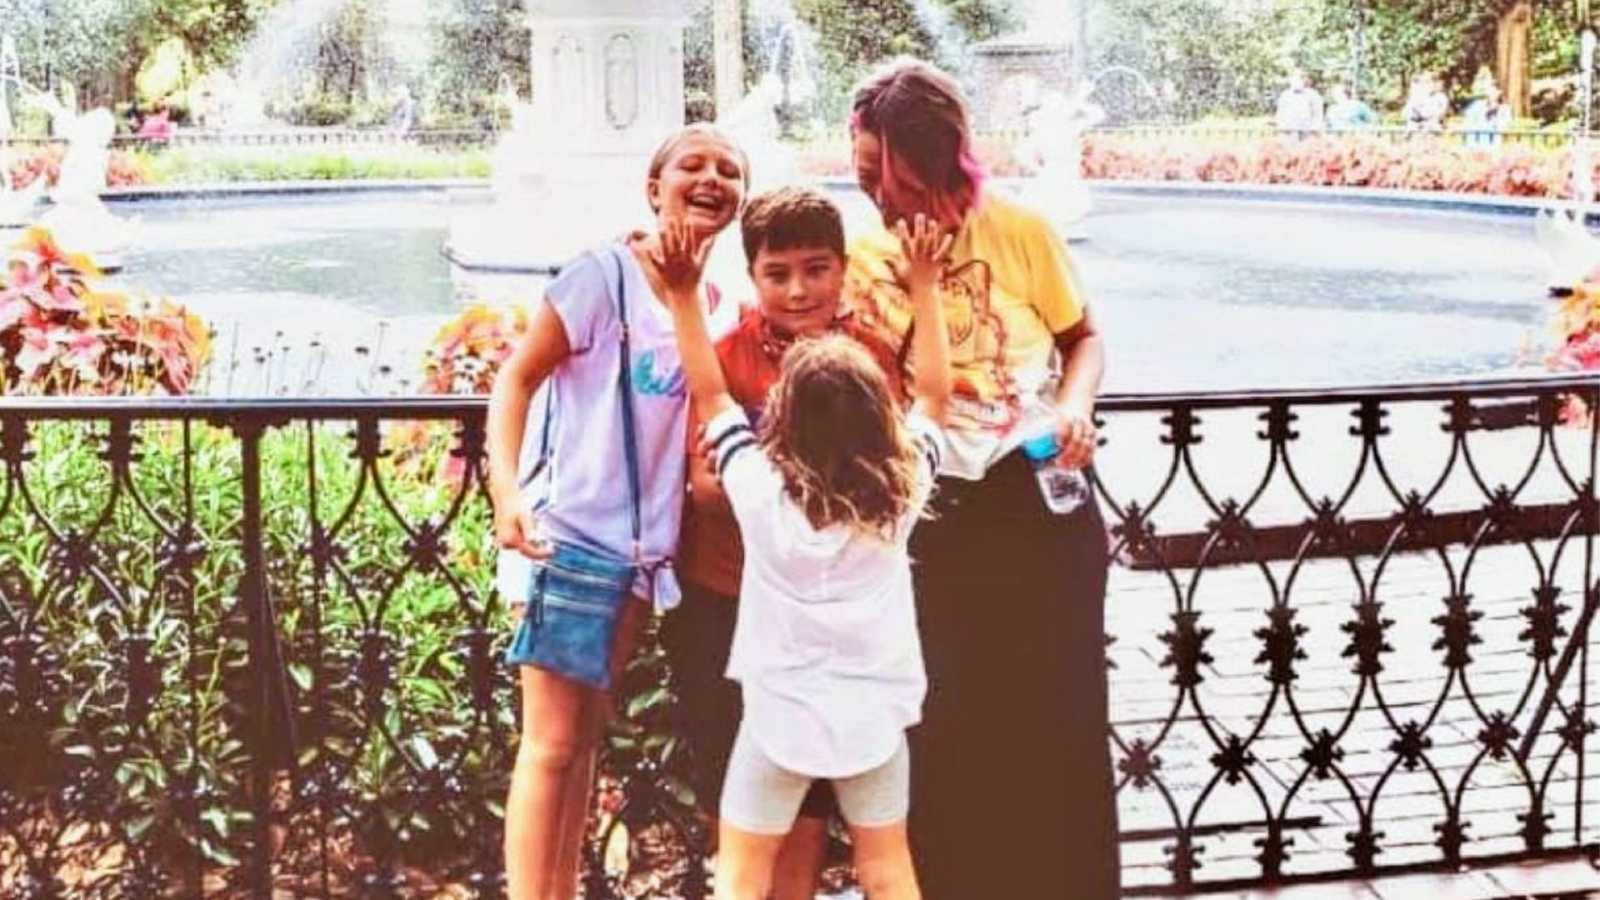 Mom takes a candid photo in front of a fountain with her three children